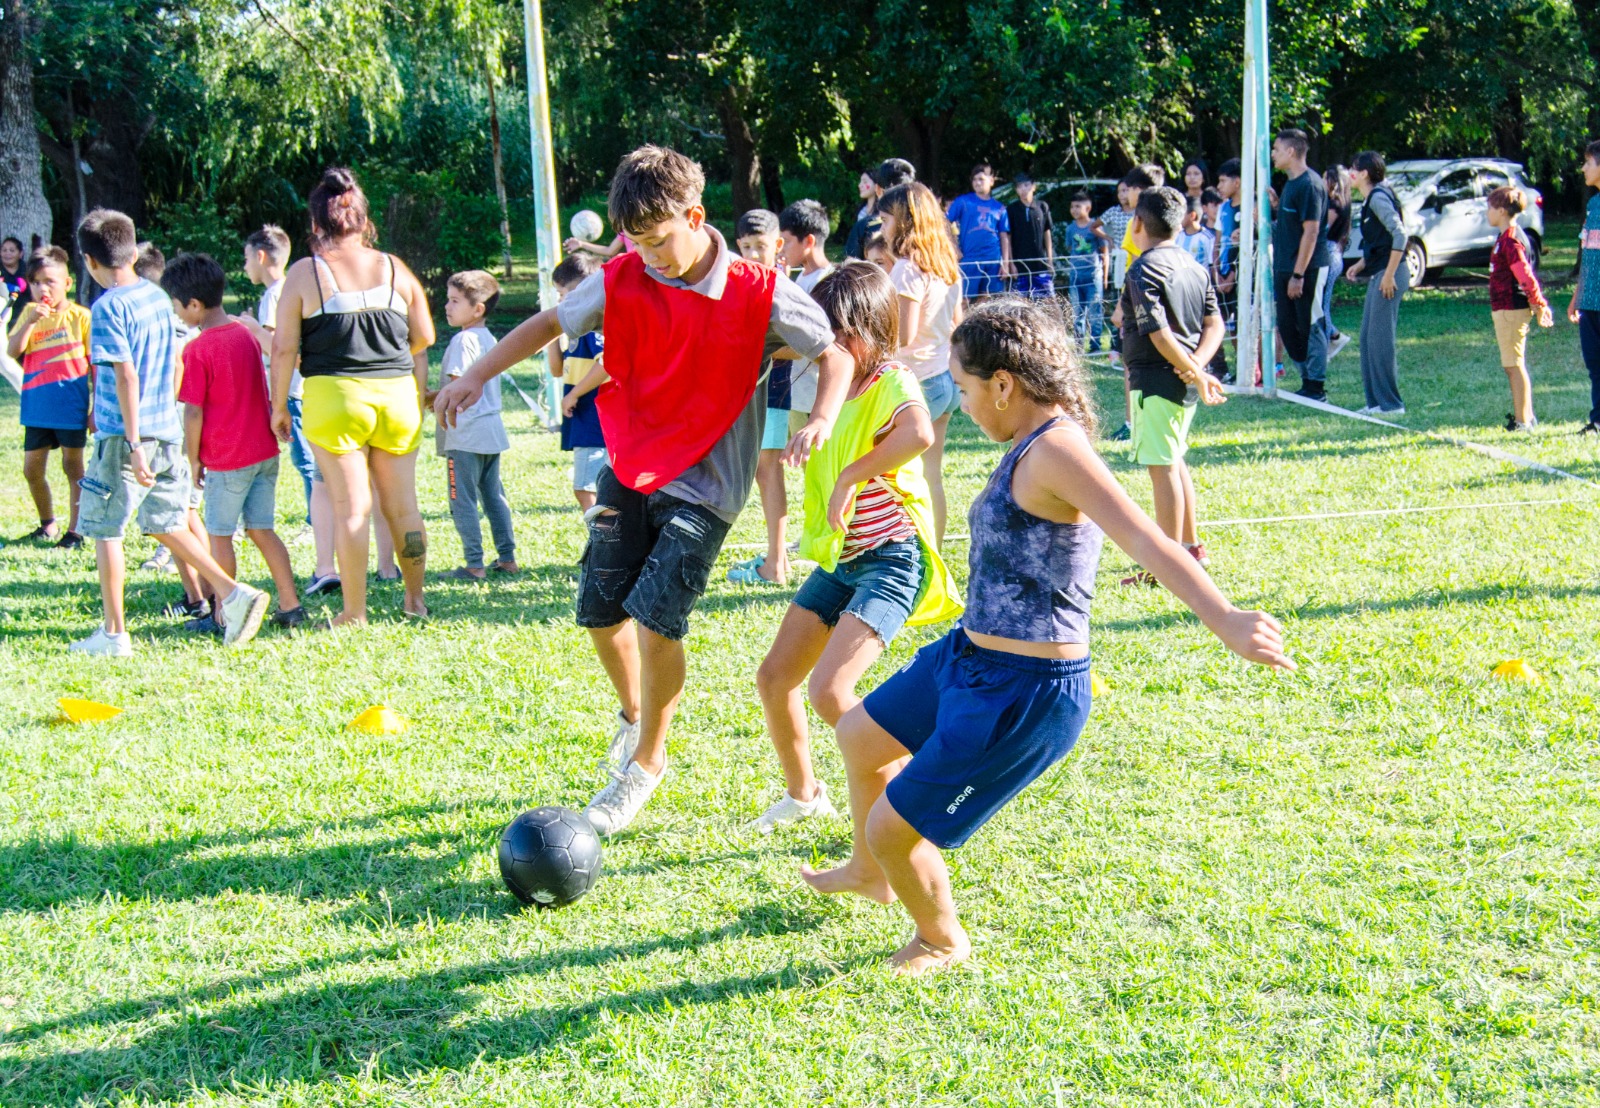 The Ruta 19 Municipal Sports Center has closed the summer season and will continue throughout the year with sports and recreational activities